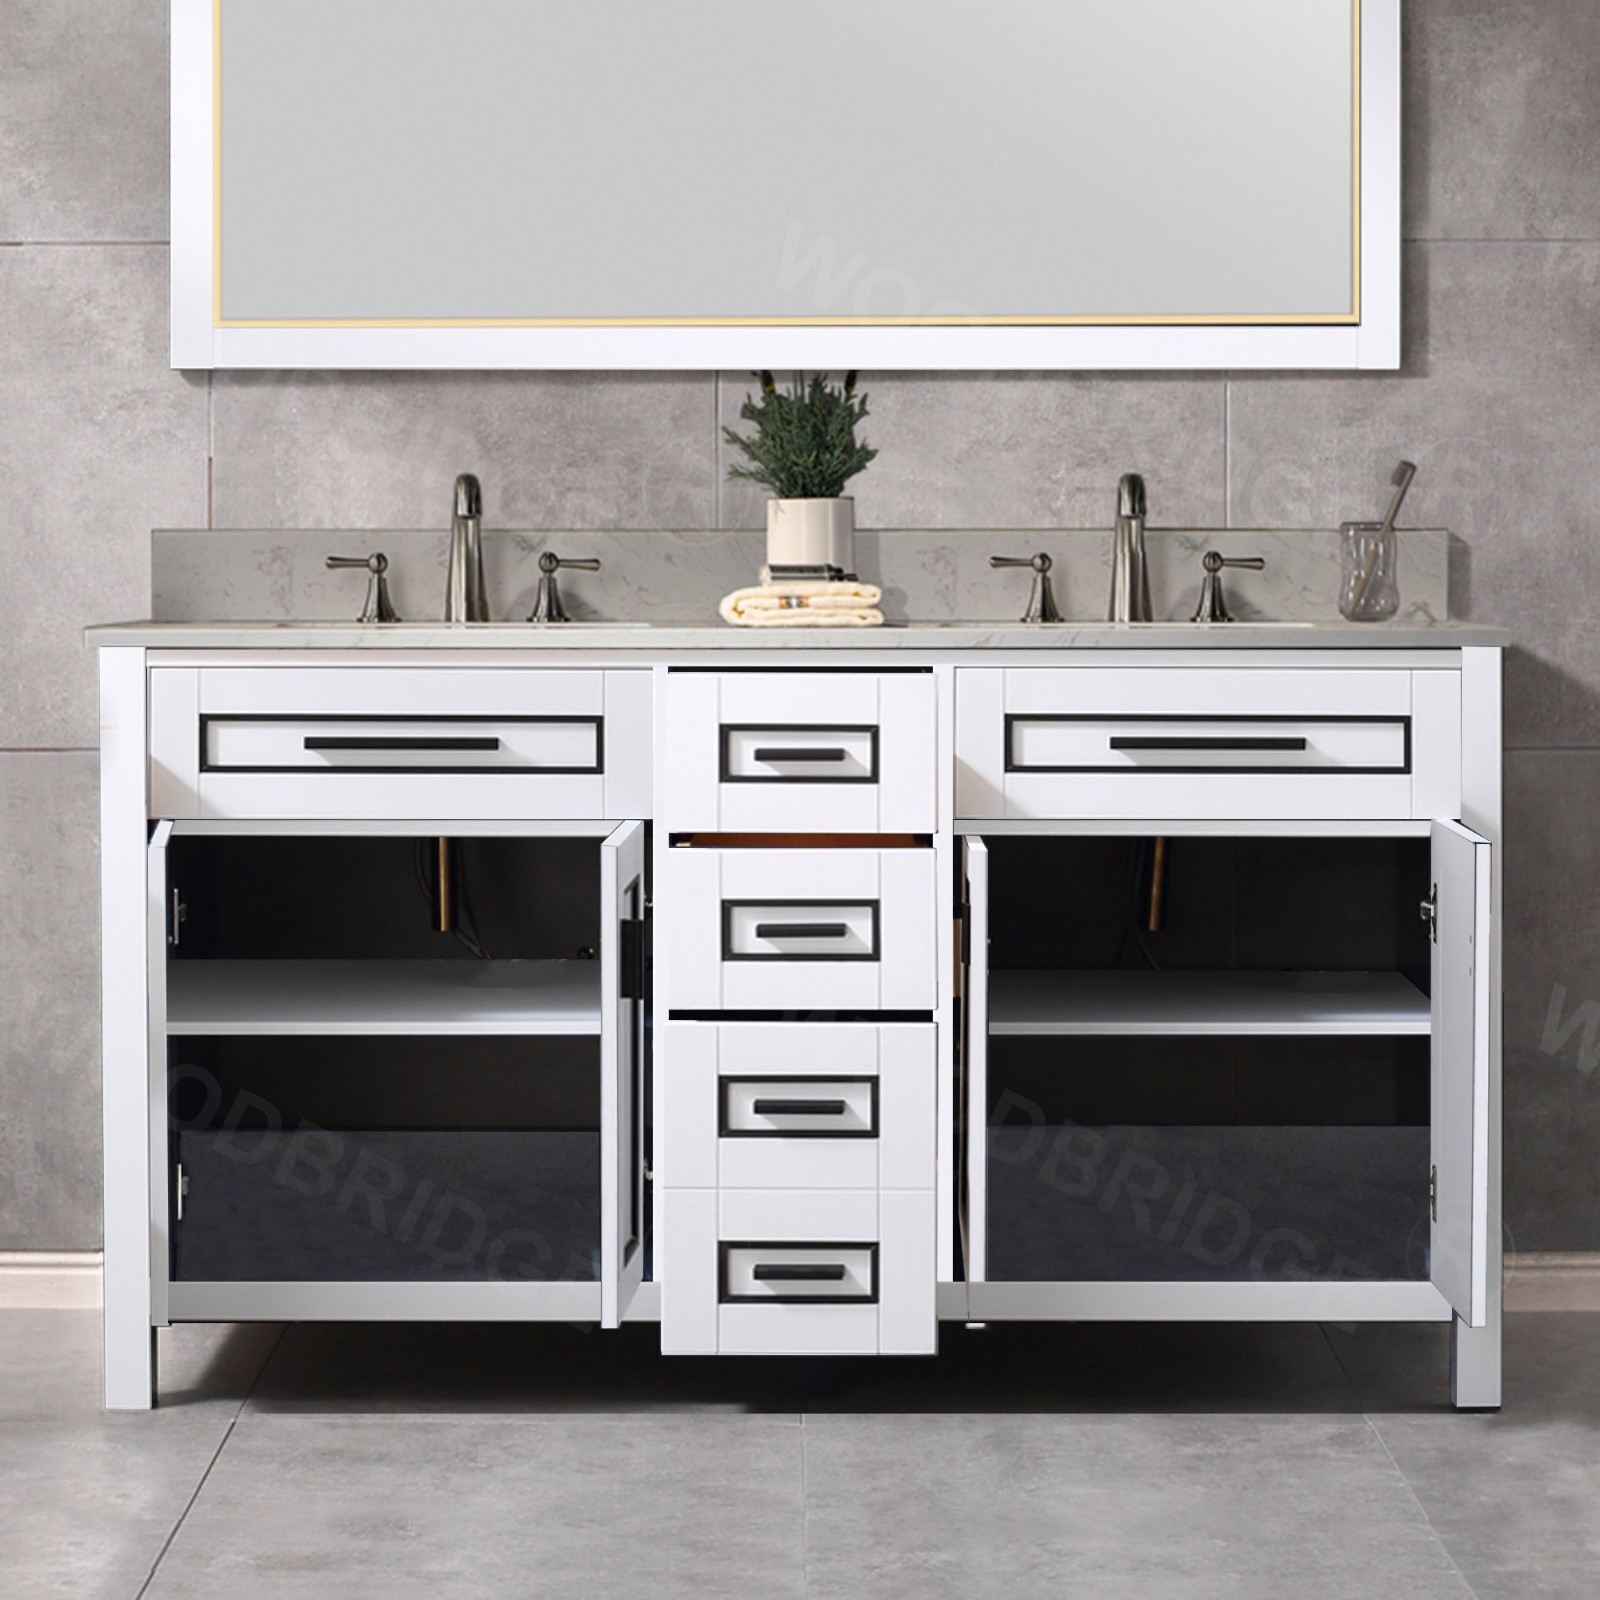  WOODBRIDGE Milan  61” Floor Mounted Single Basin Vanity Set with Solid Wood Cabinet in White and Engineered stone composite Vanity Top in Carrara White with Pre-installed Undermount Rectangle Bathroom Sink in White and Pre-Drilled 3-Hole for 8”Widespread_4626